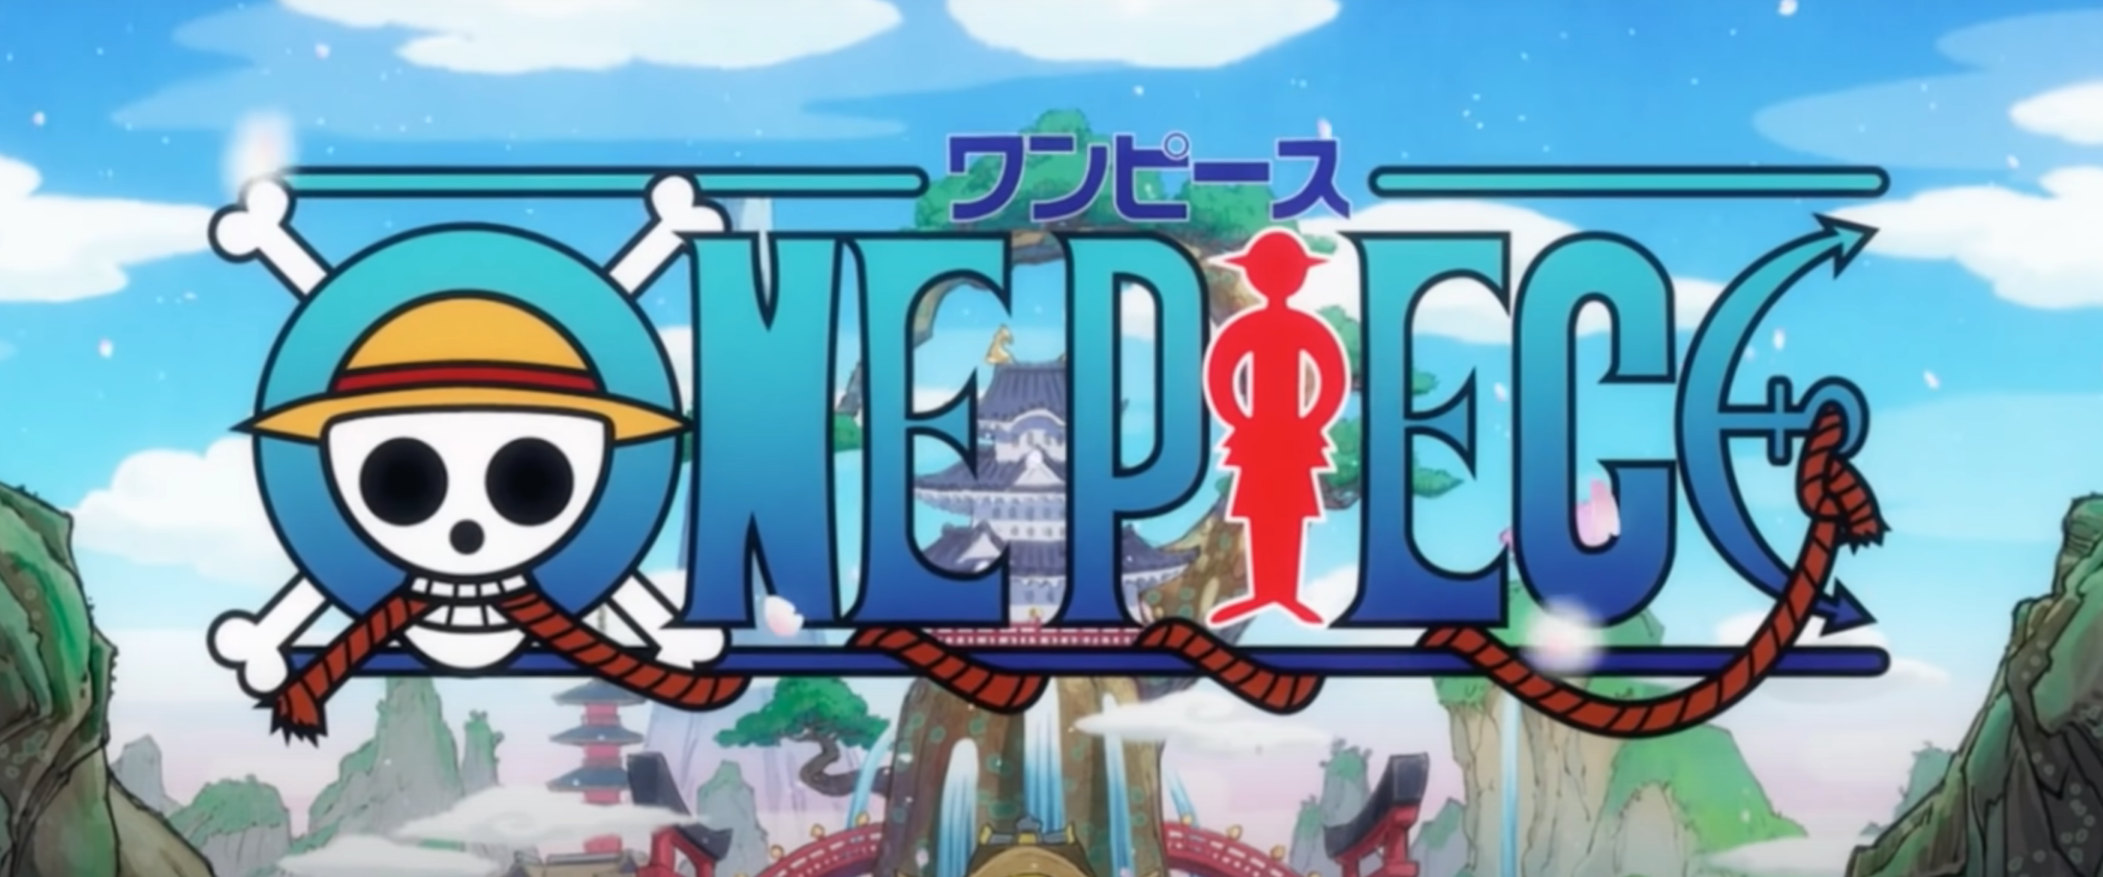 One Piece 1000th Episode Celebration Coming to Anime NYC